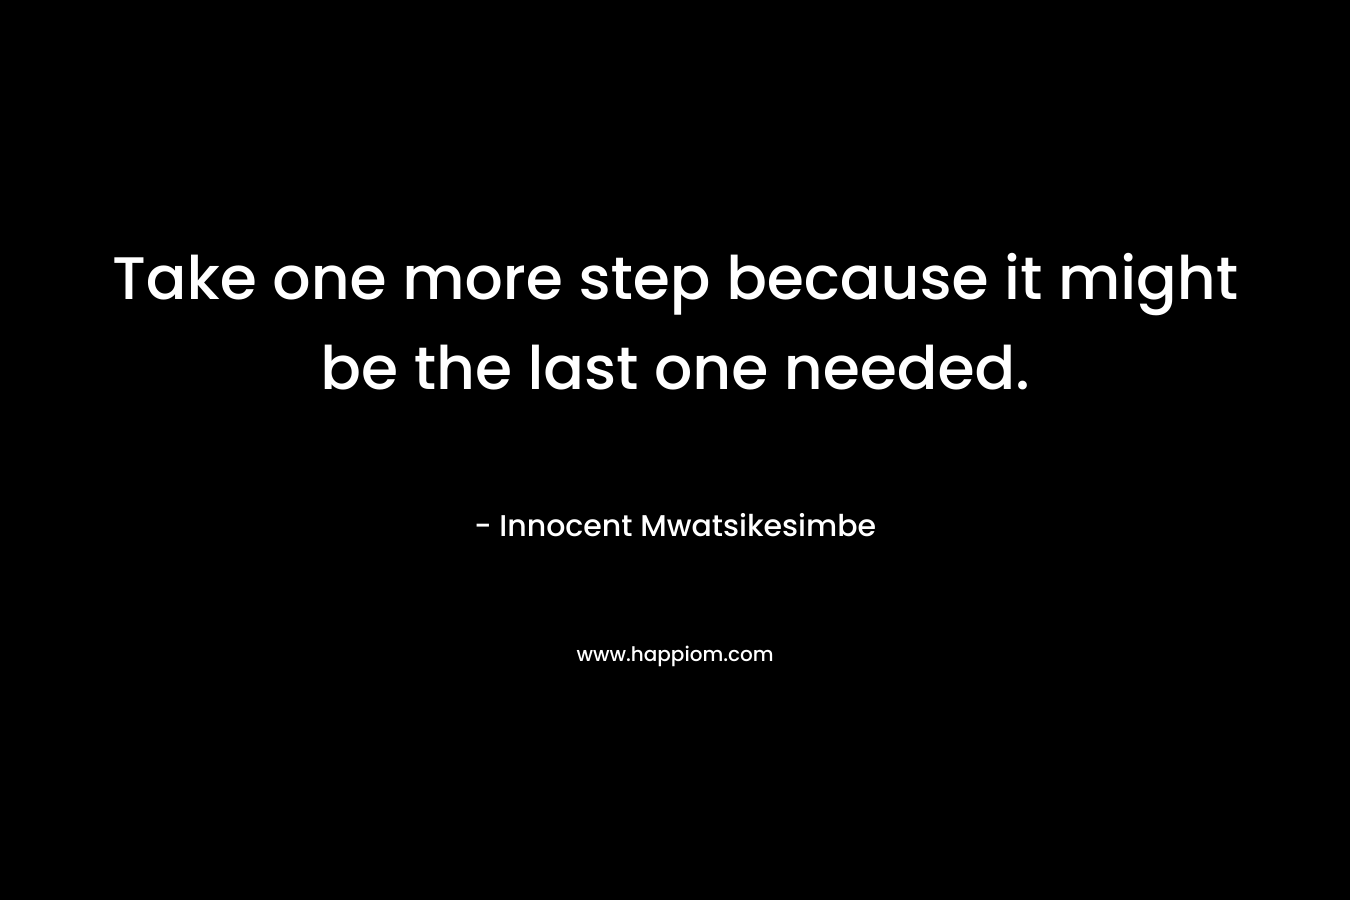 Take one more step because it might be the last one needed.